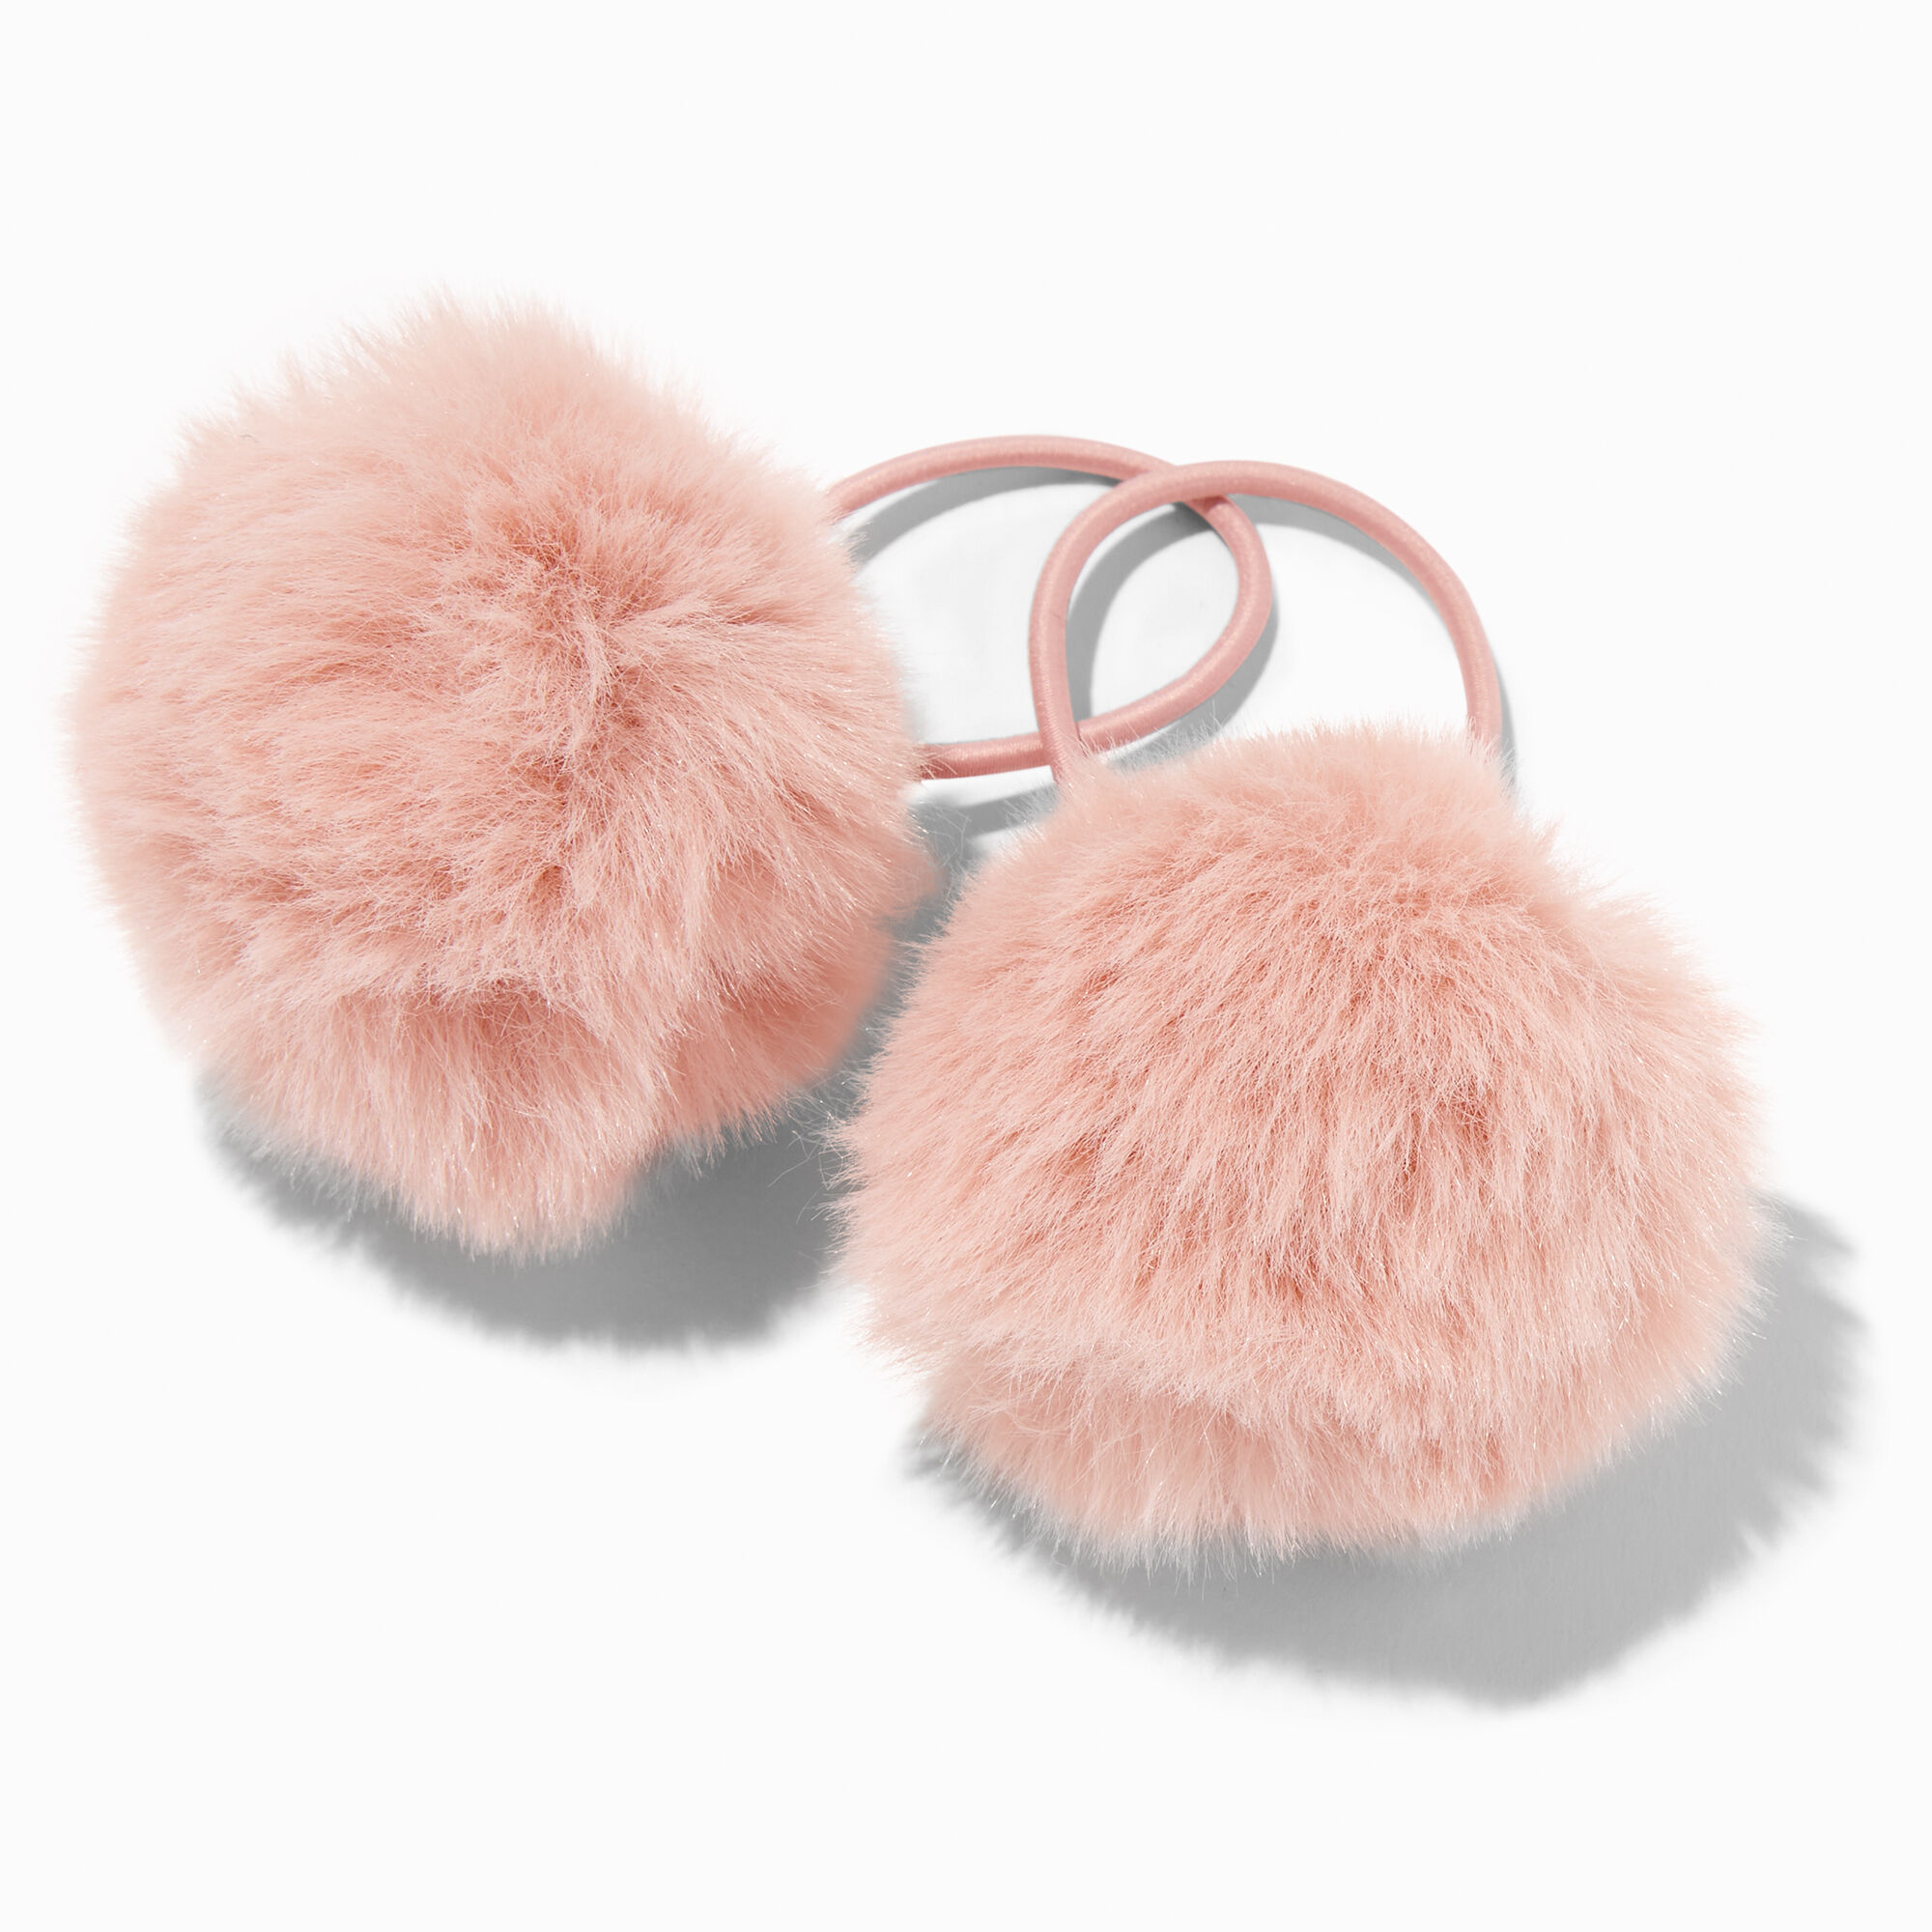 View Claires Blush Faux Fur Pom Hair Ties 2 Pack Pink information